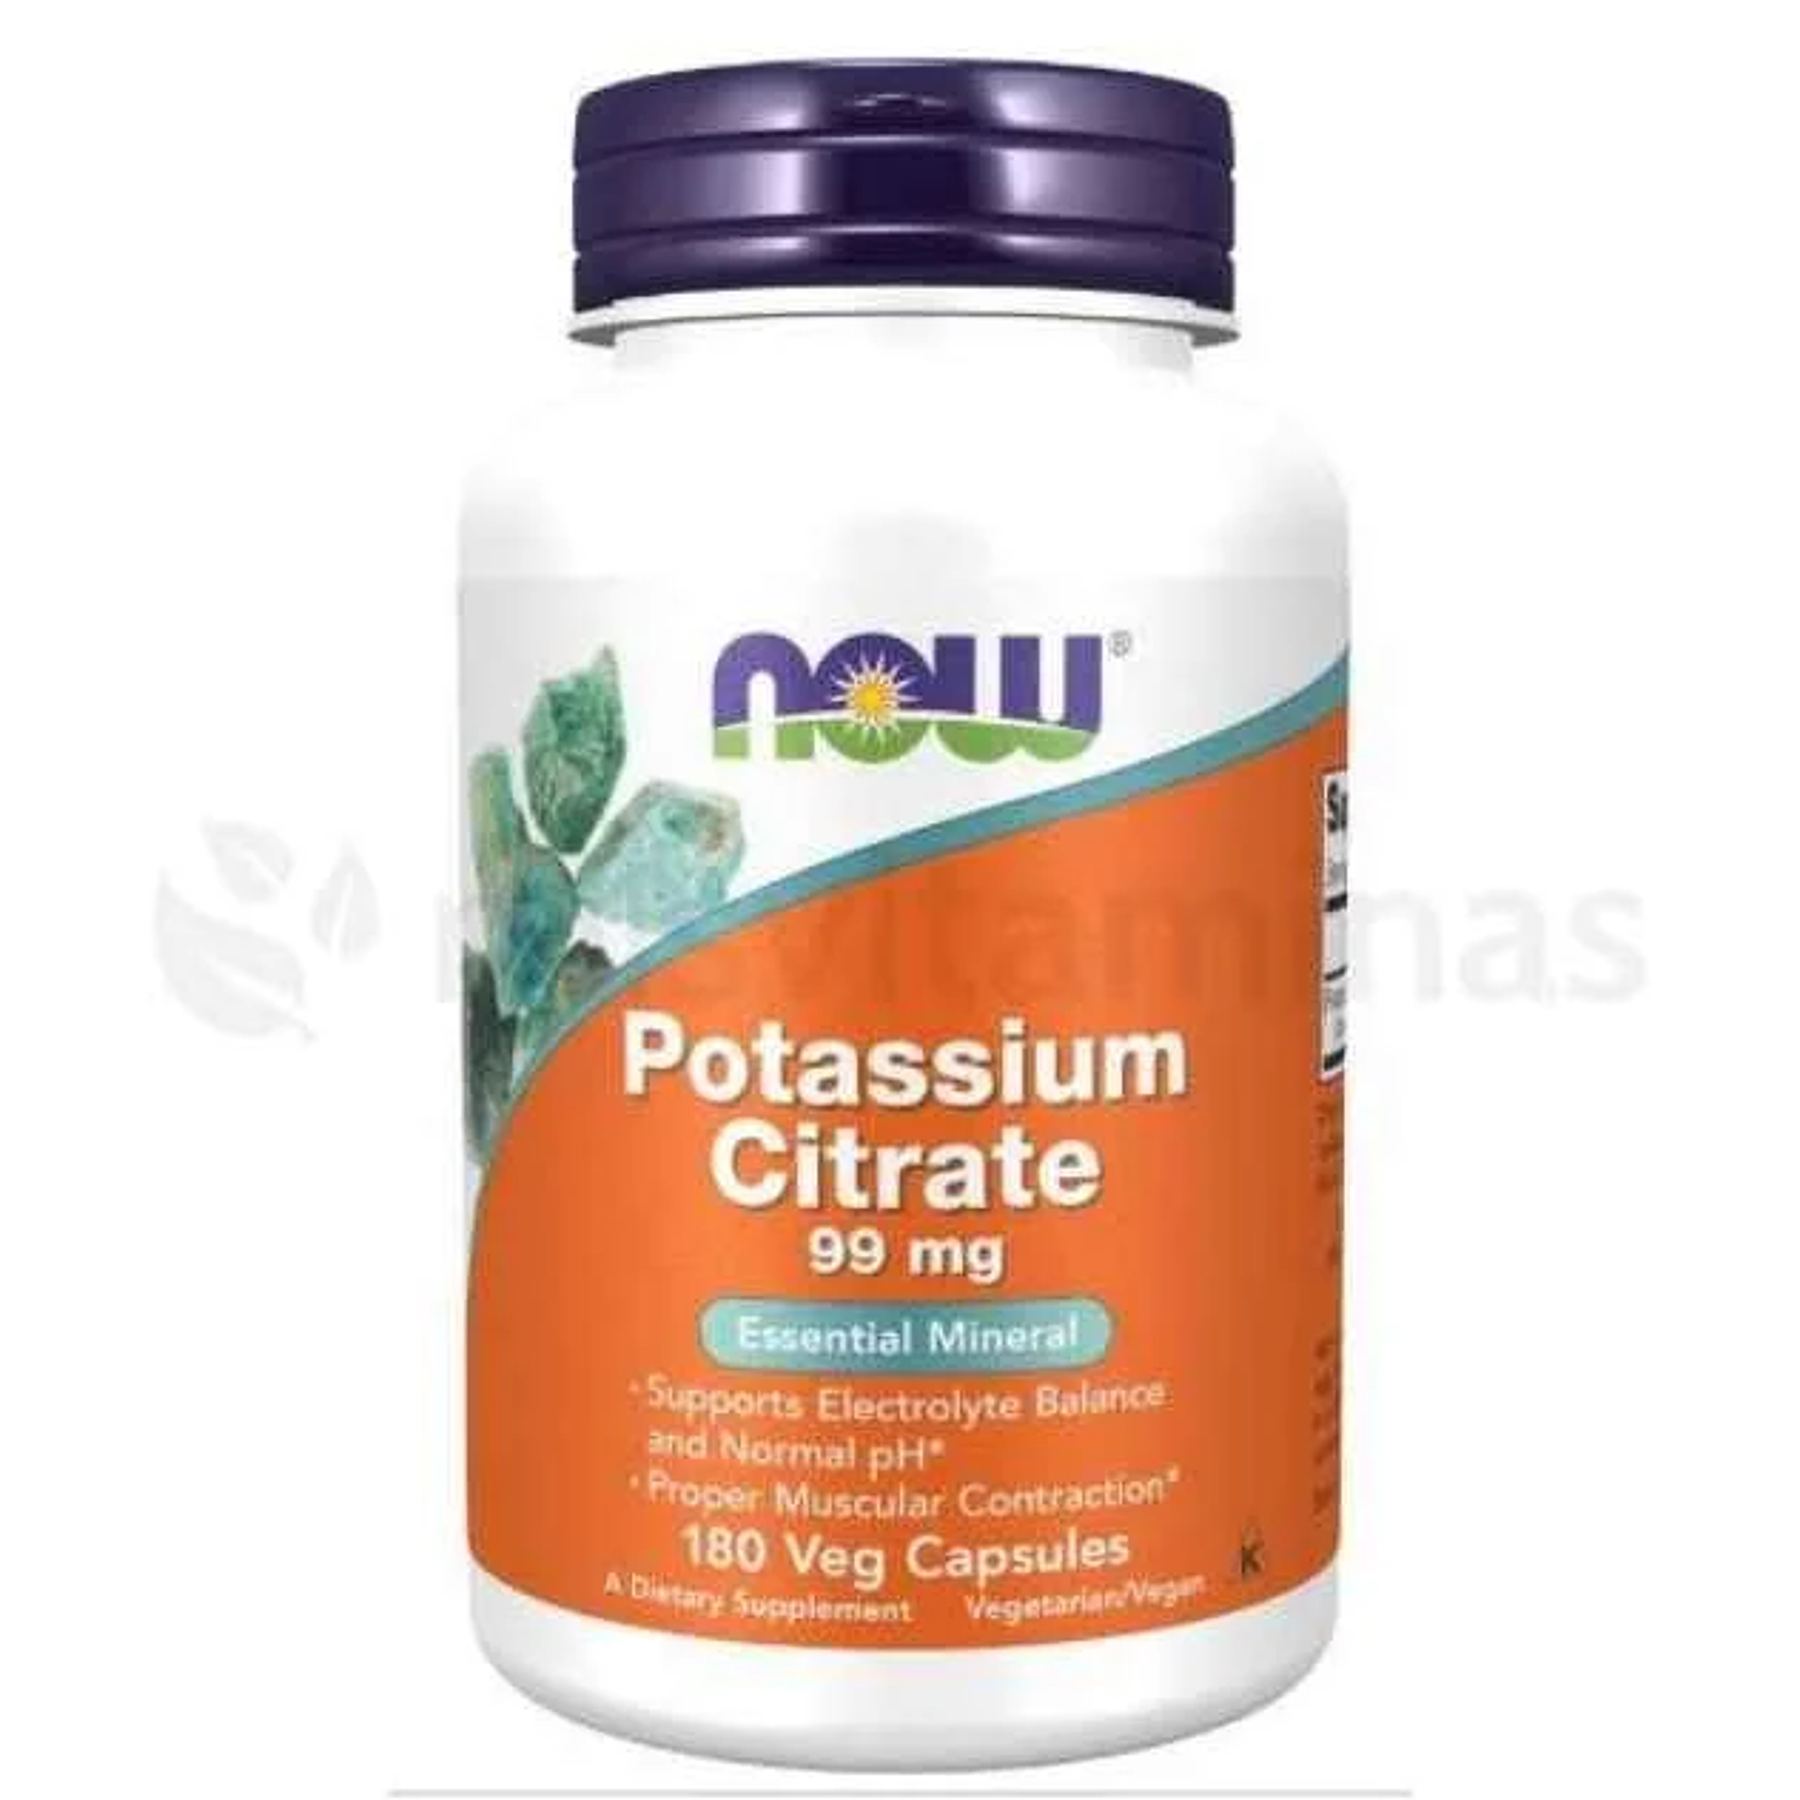 Potassium Citrate 99 mg Now 